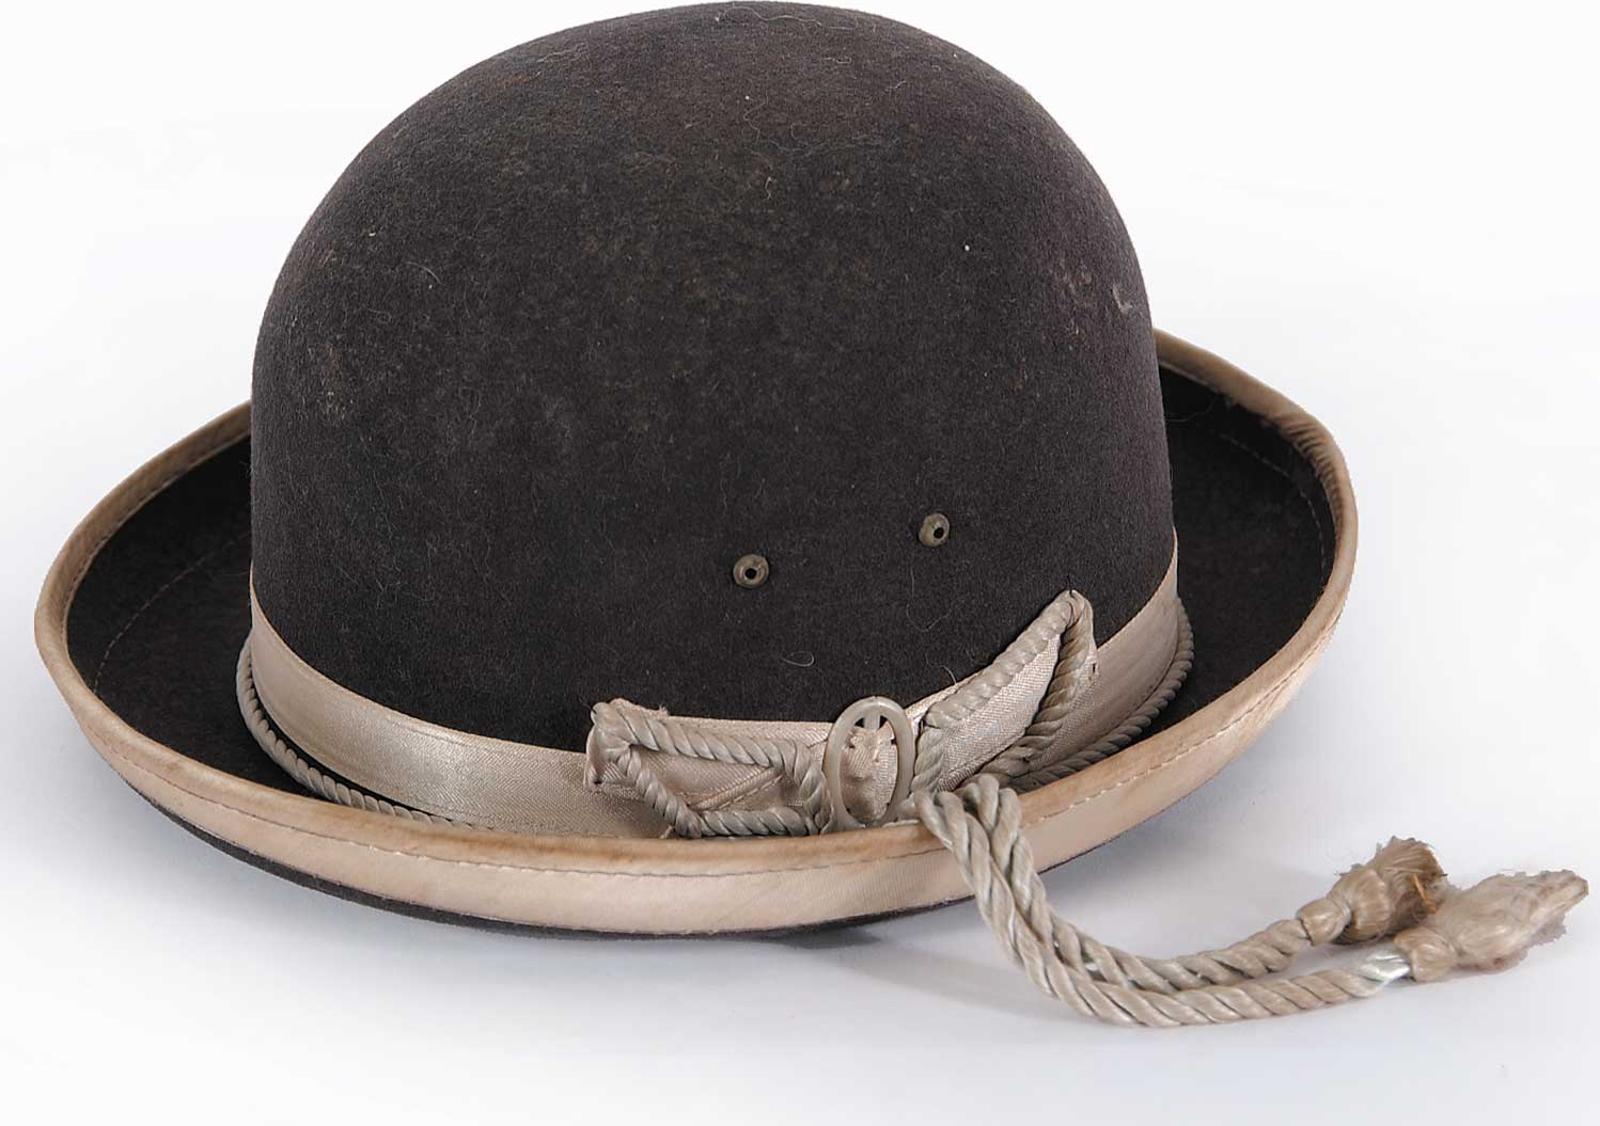 First Nations Basket School - Child's Bowler Hat